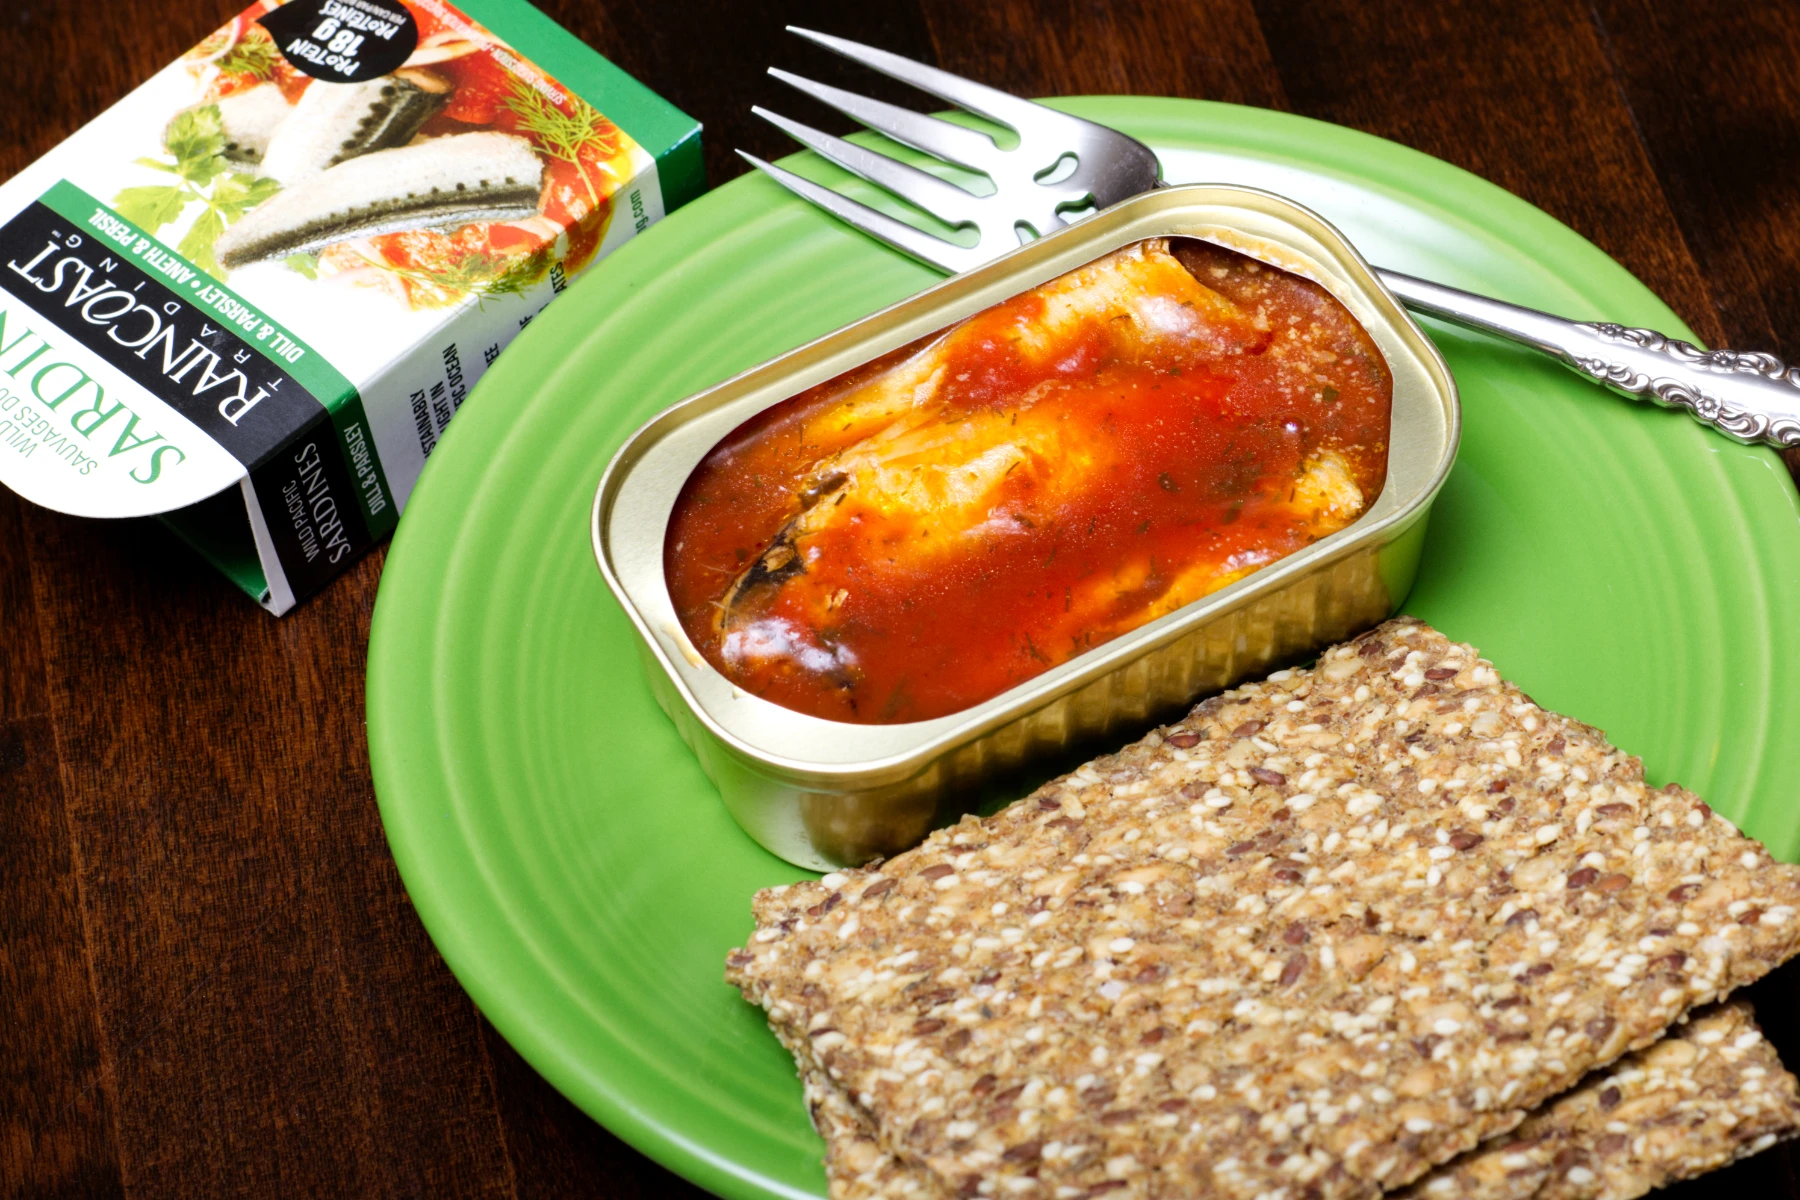 Opened can of sardines, three pieces in an orange red tomato sauce. Two pieces of crispbread on a plate.